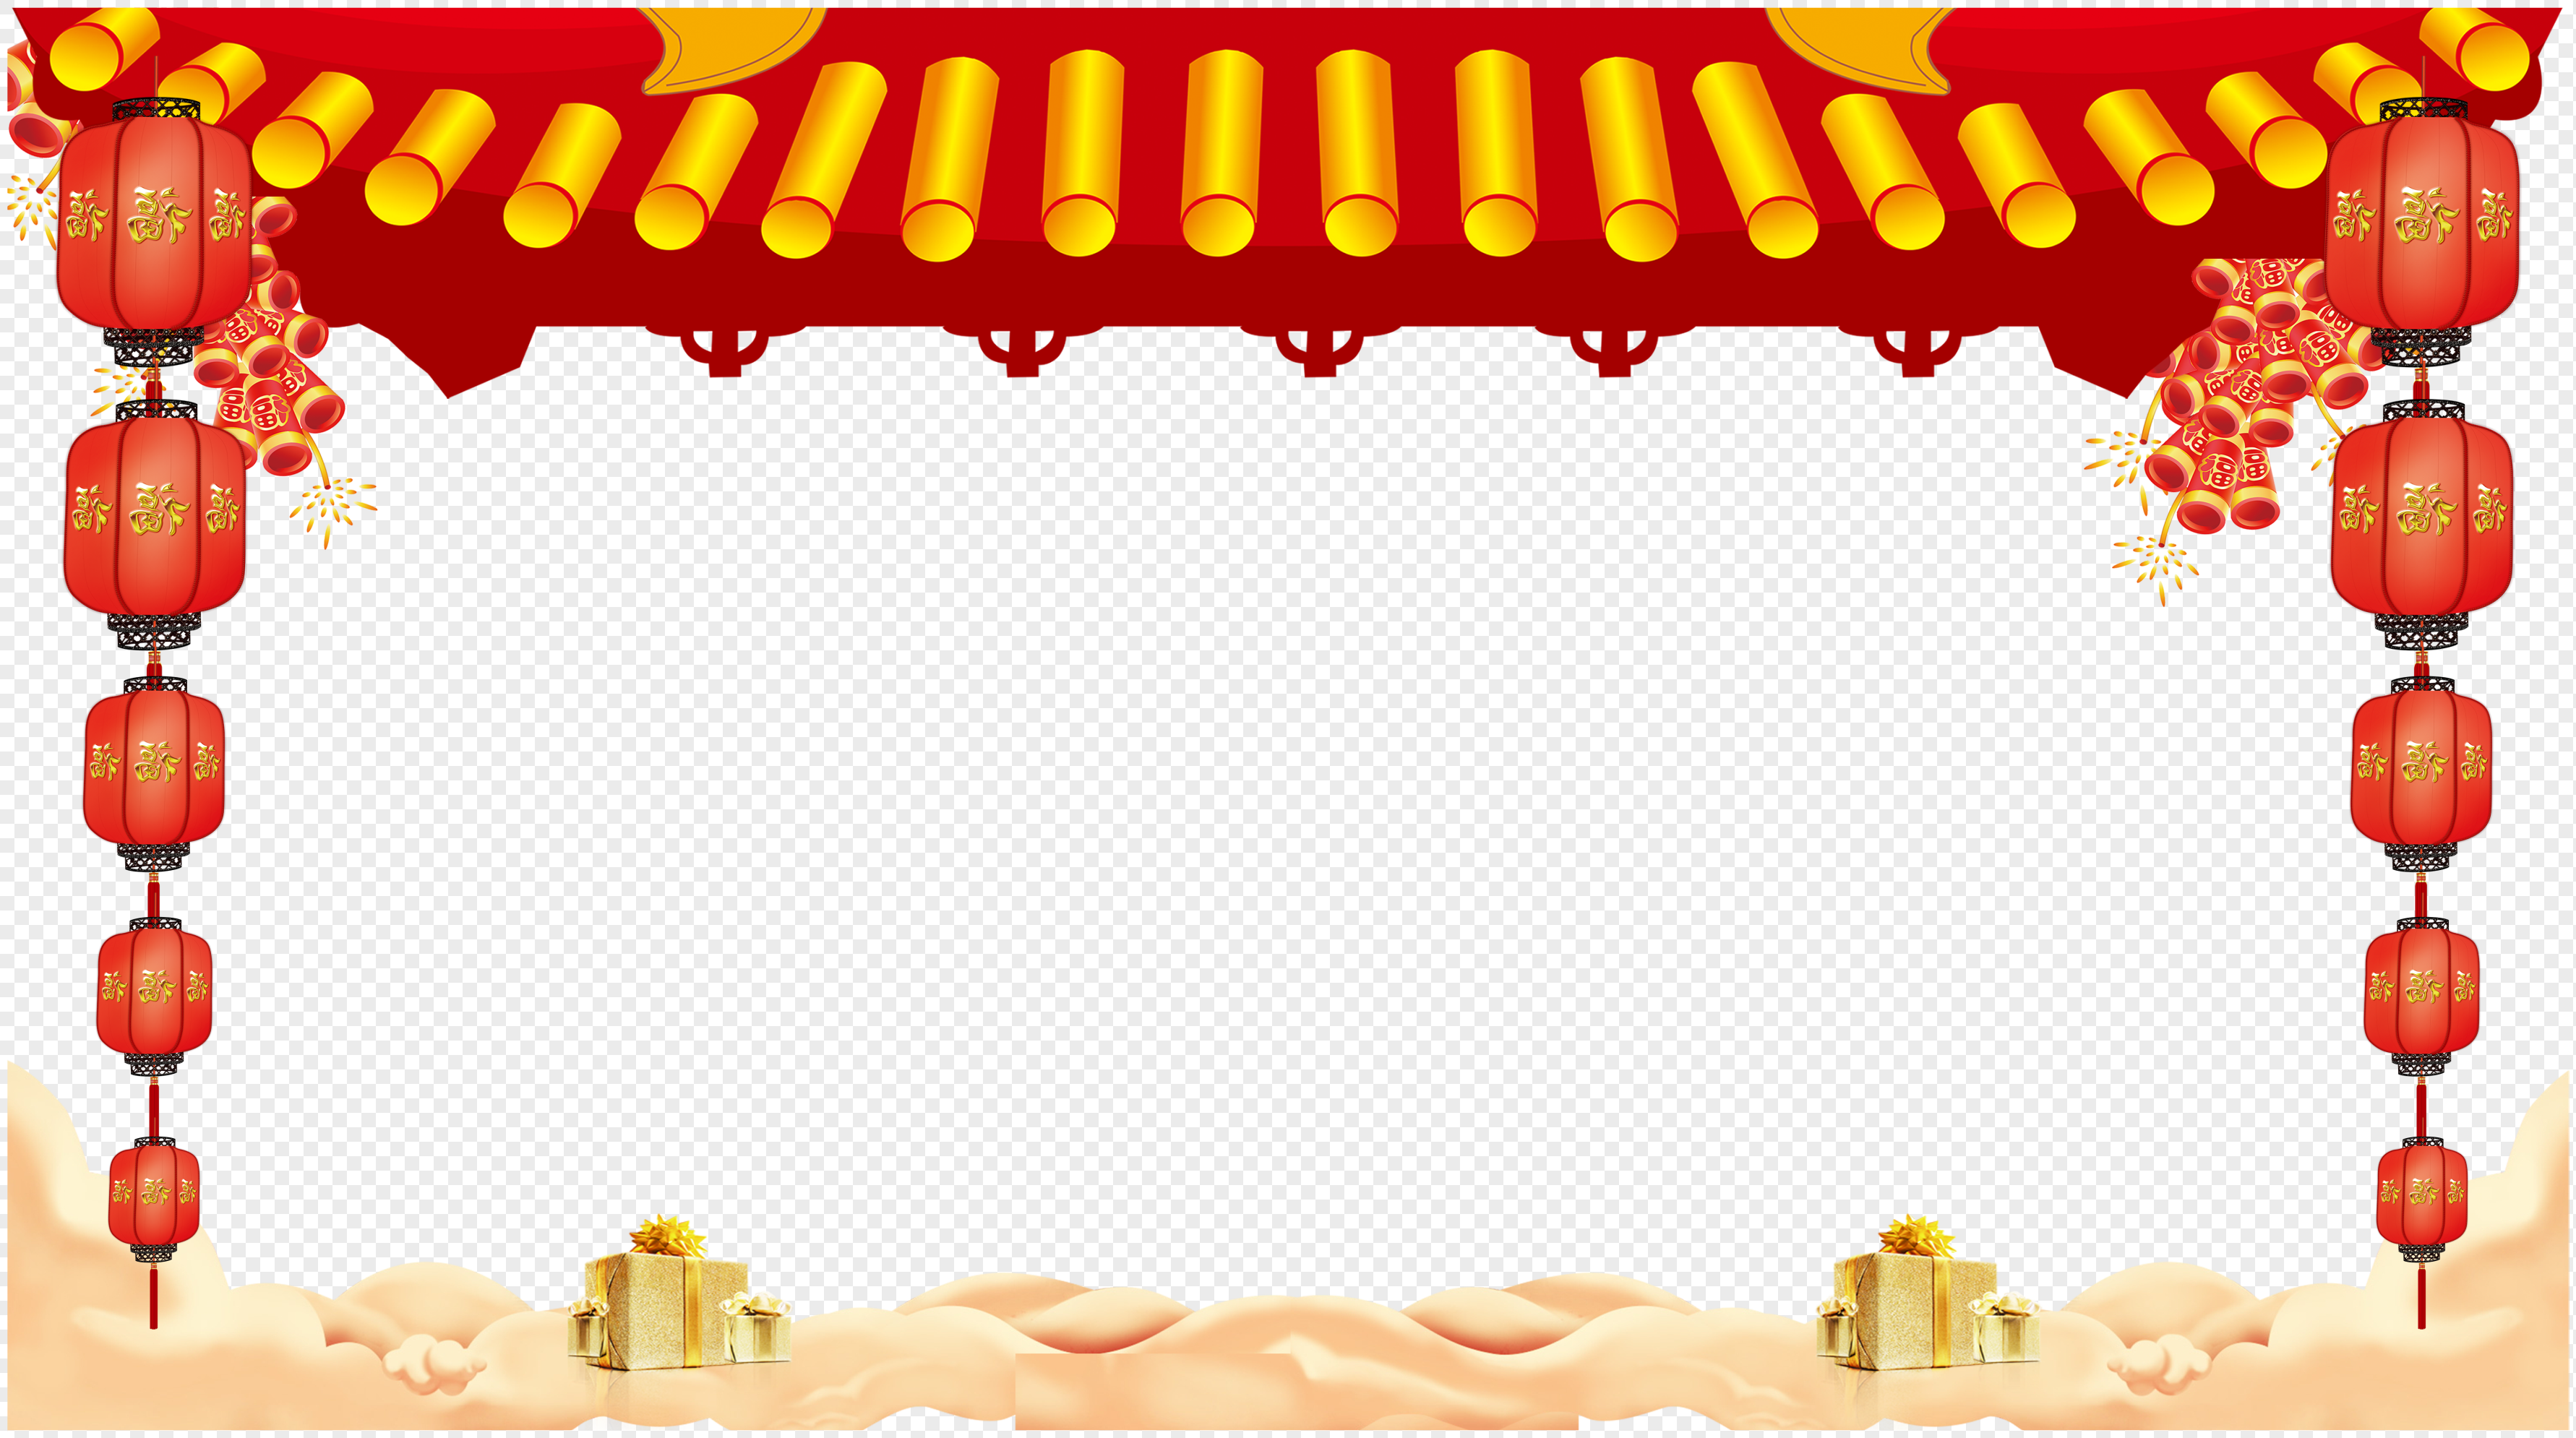 new-year-chinese-style-border-png-image-picture-free-download-400480354-lovepik